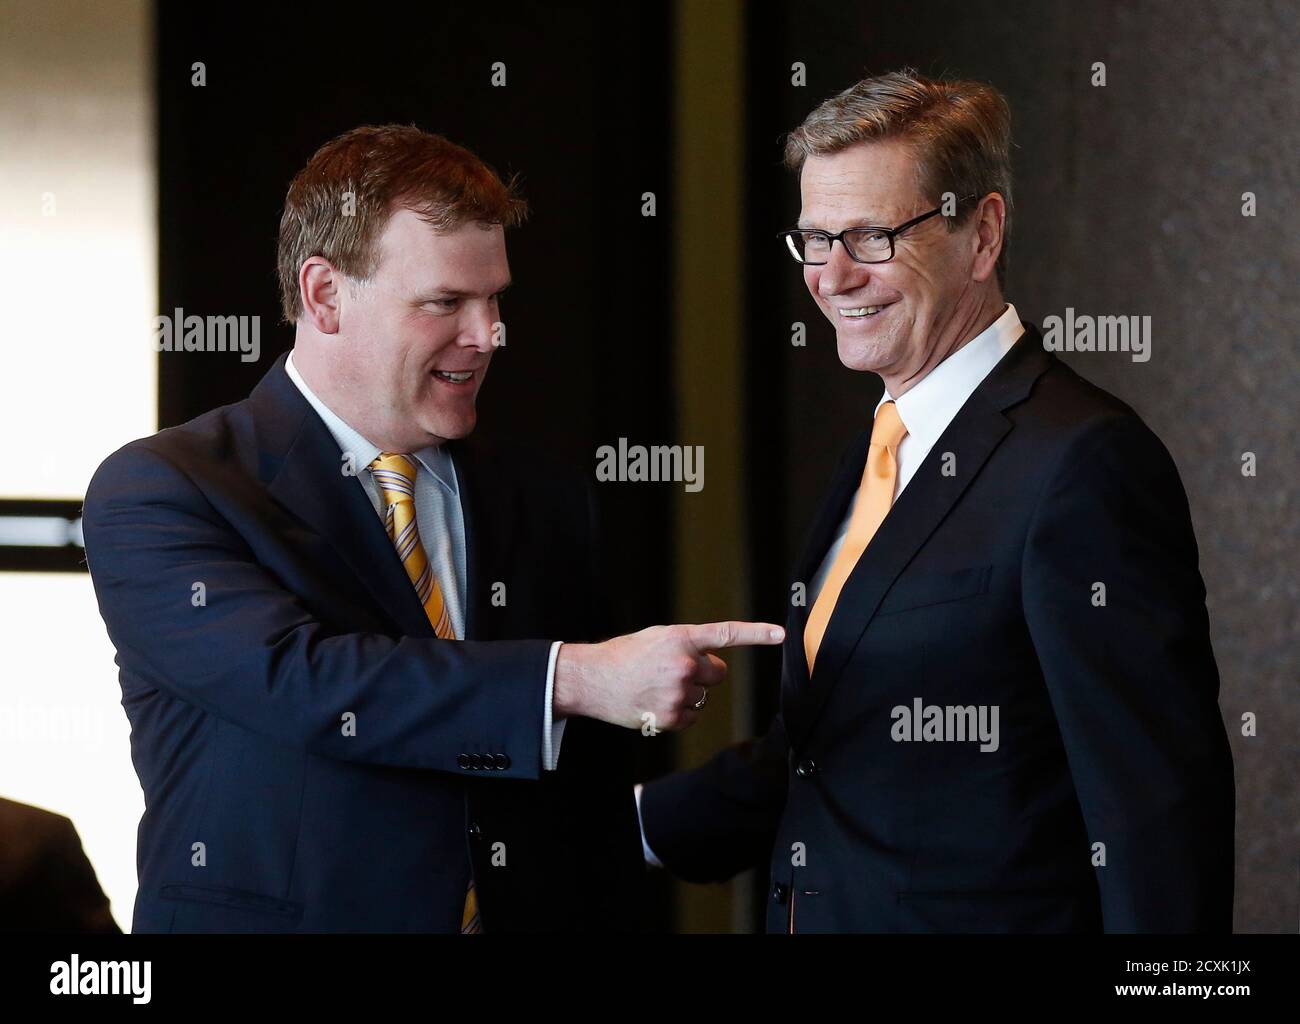 Canada's Foreign Minister John Baird (L) greets his German counterpart Guido Westerwelle at the Lester B. Pearson Building in Ottawa May 30, 2013. REUTERS/Chris Wattie (CANADA - Tags: POLITICS) Stock Photo